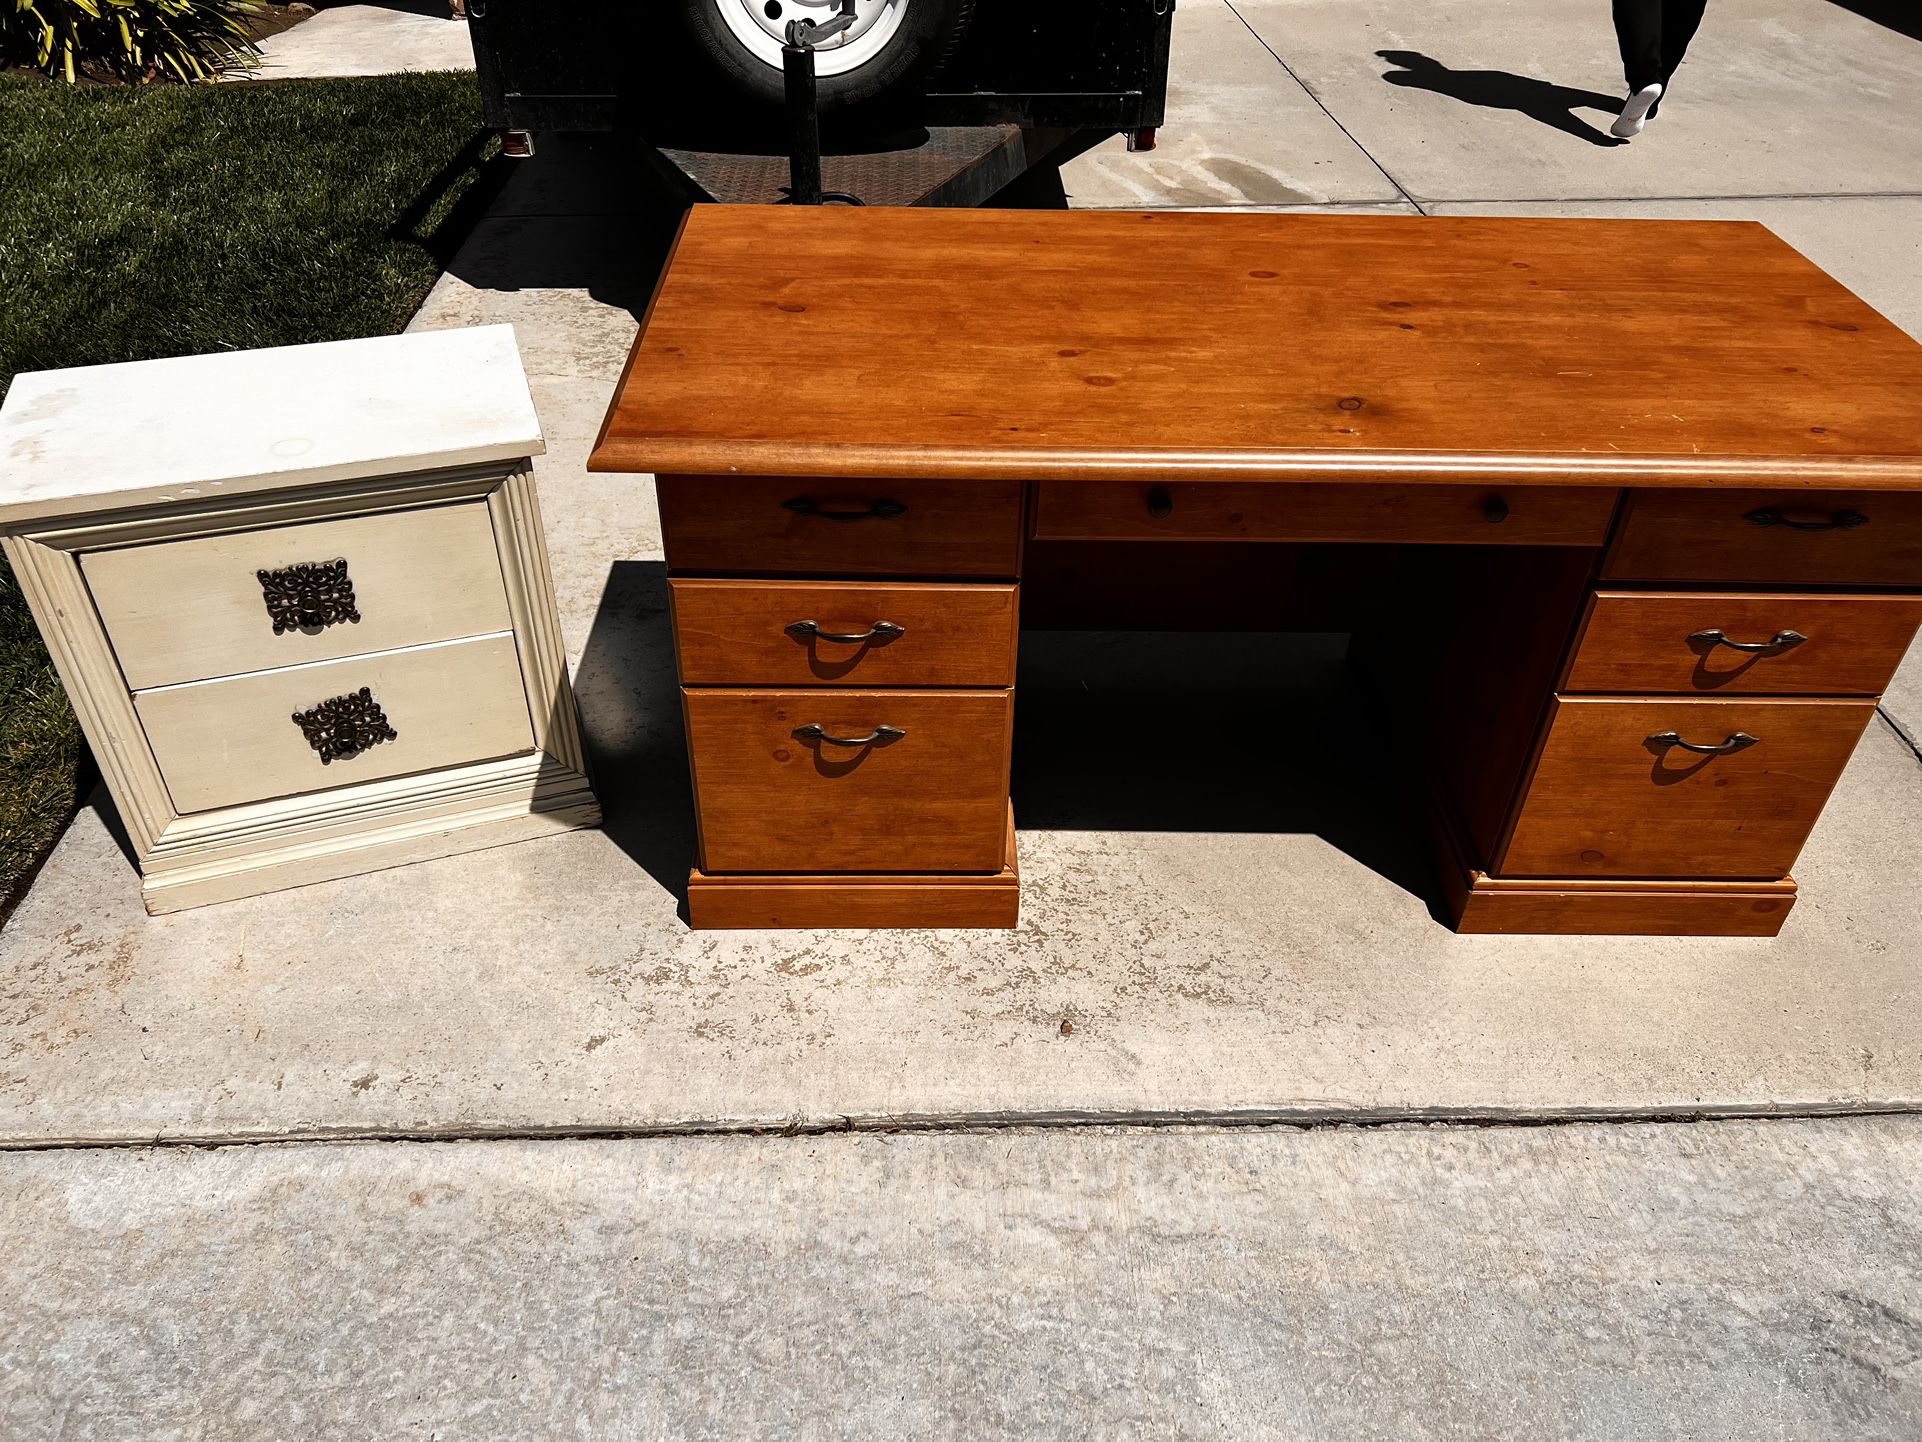 FREE -Desk and nightstand